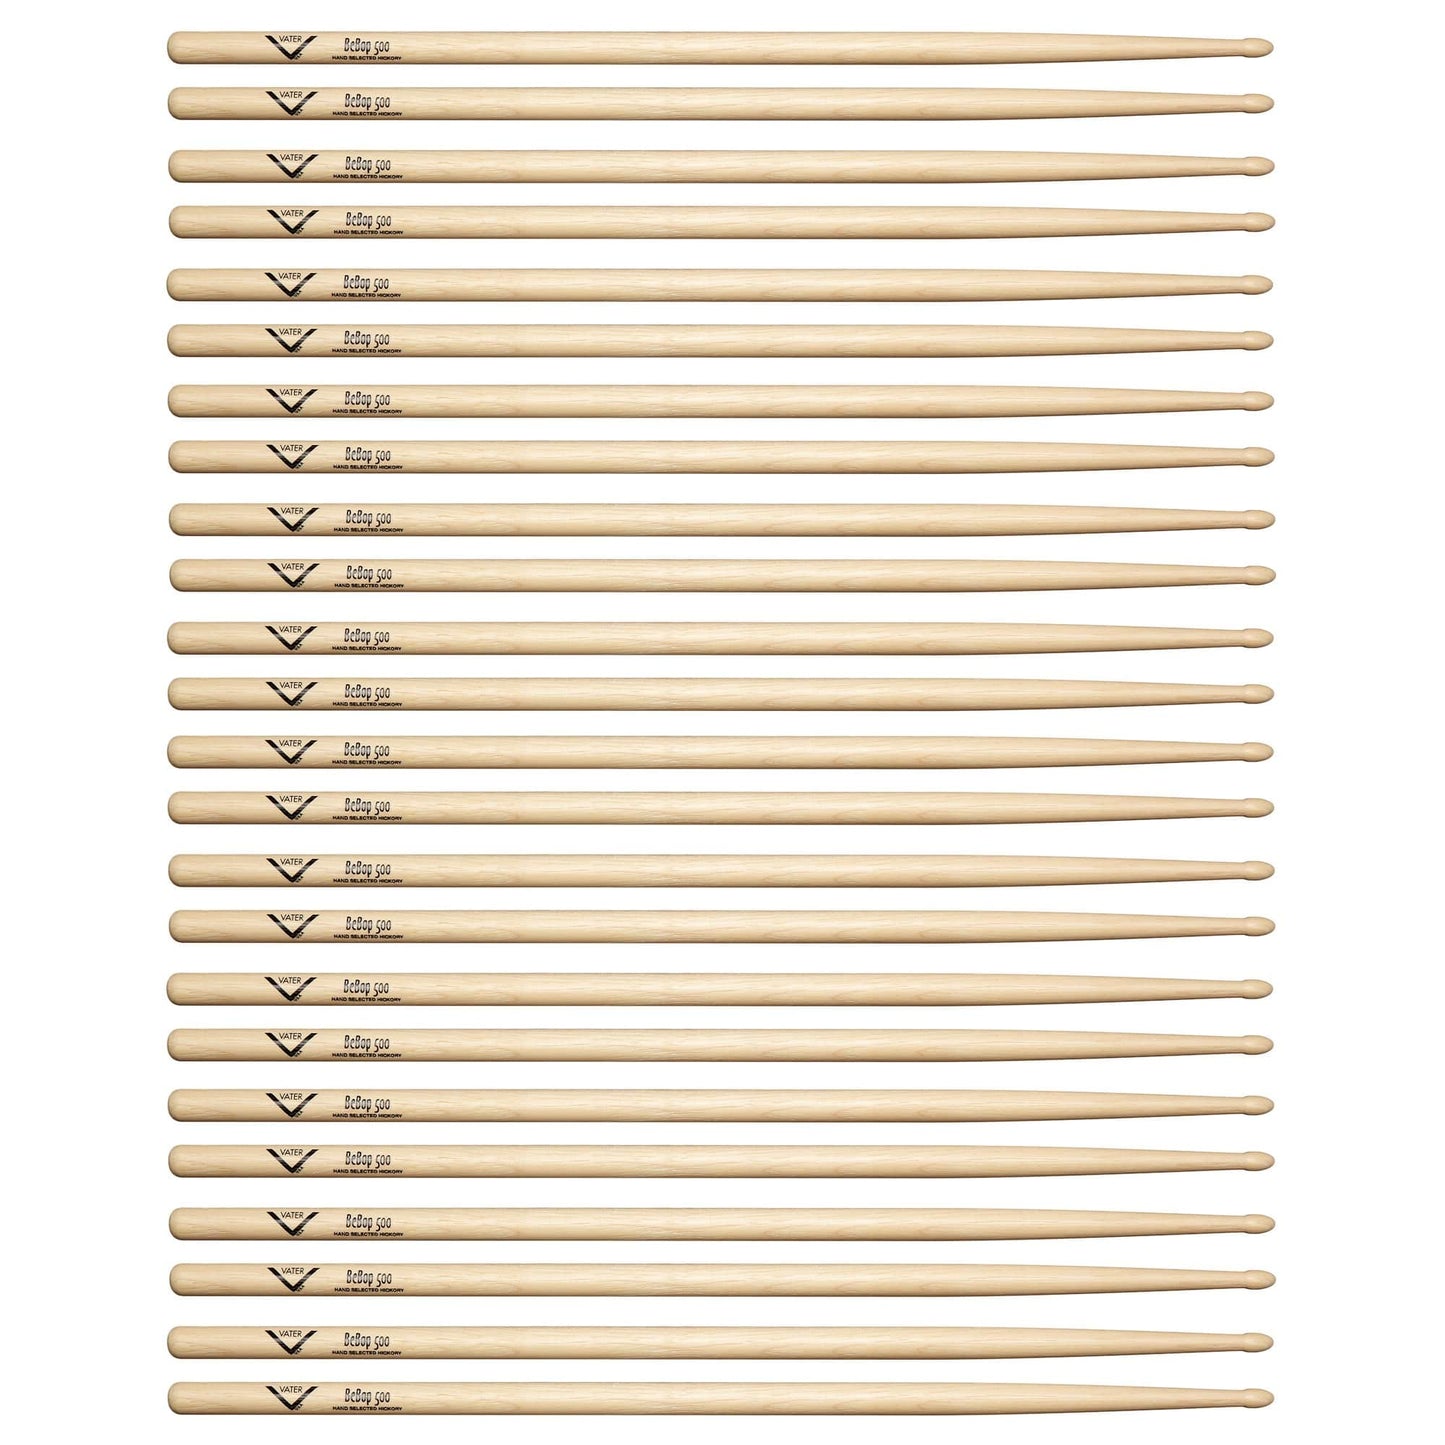 Vater BeBop 500 Drum Sticks (12 Pair Bundle) Drums and Percussion / Parts and Accessories / Drum Sticks and Mallets